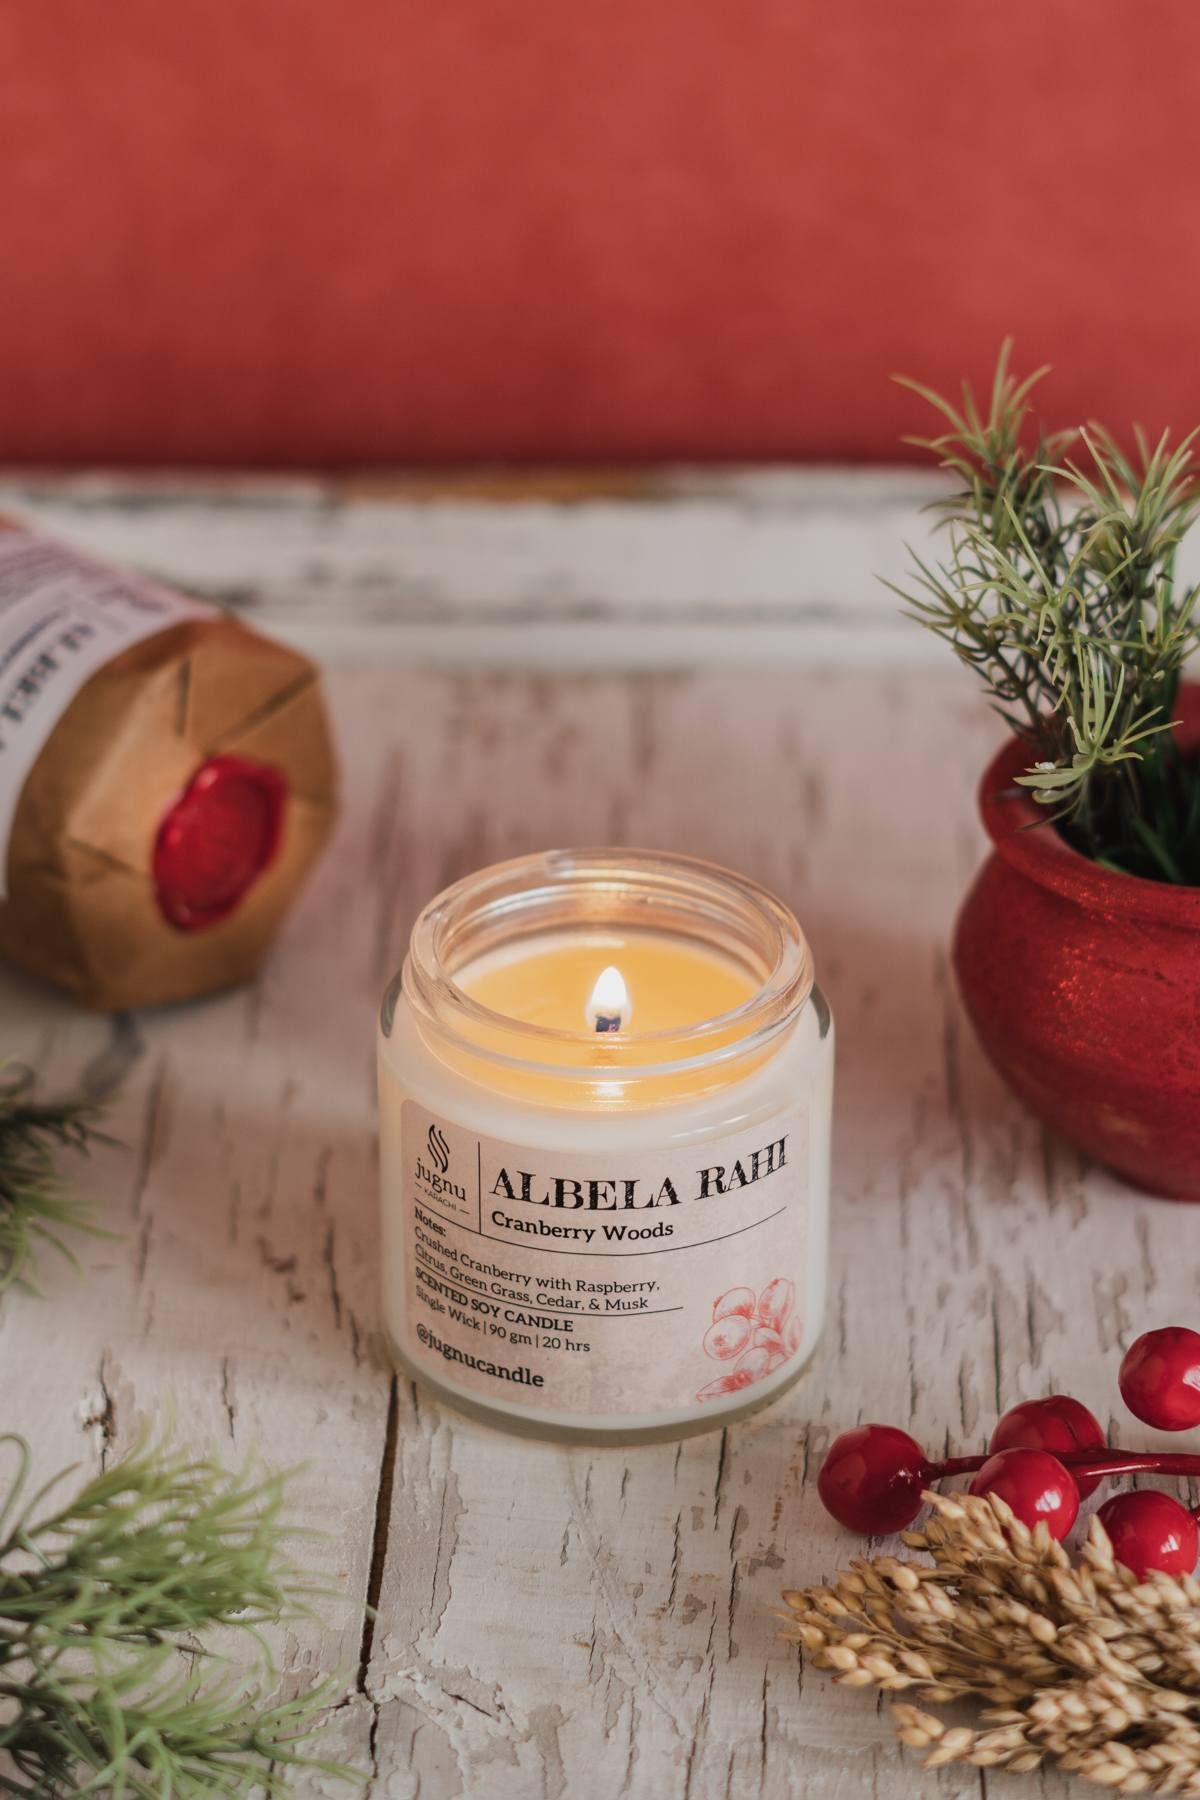 Albela Rahi (Cranberry Woods) - Hand-Poured Soy Candle